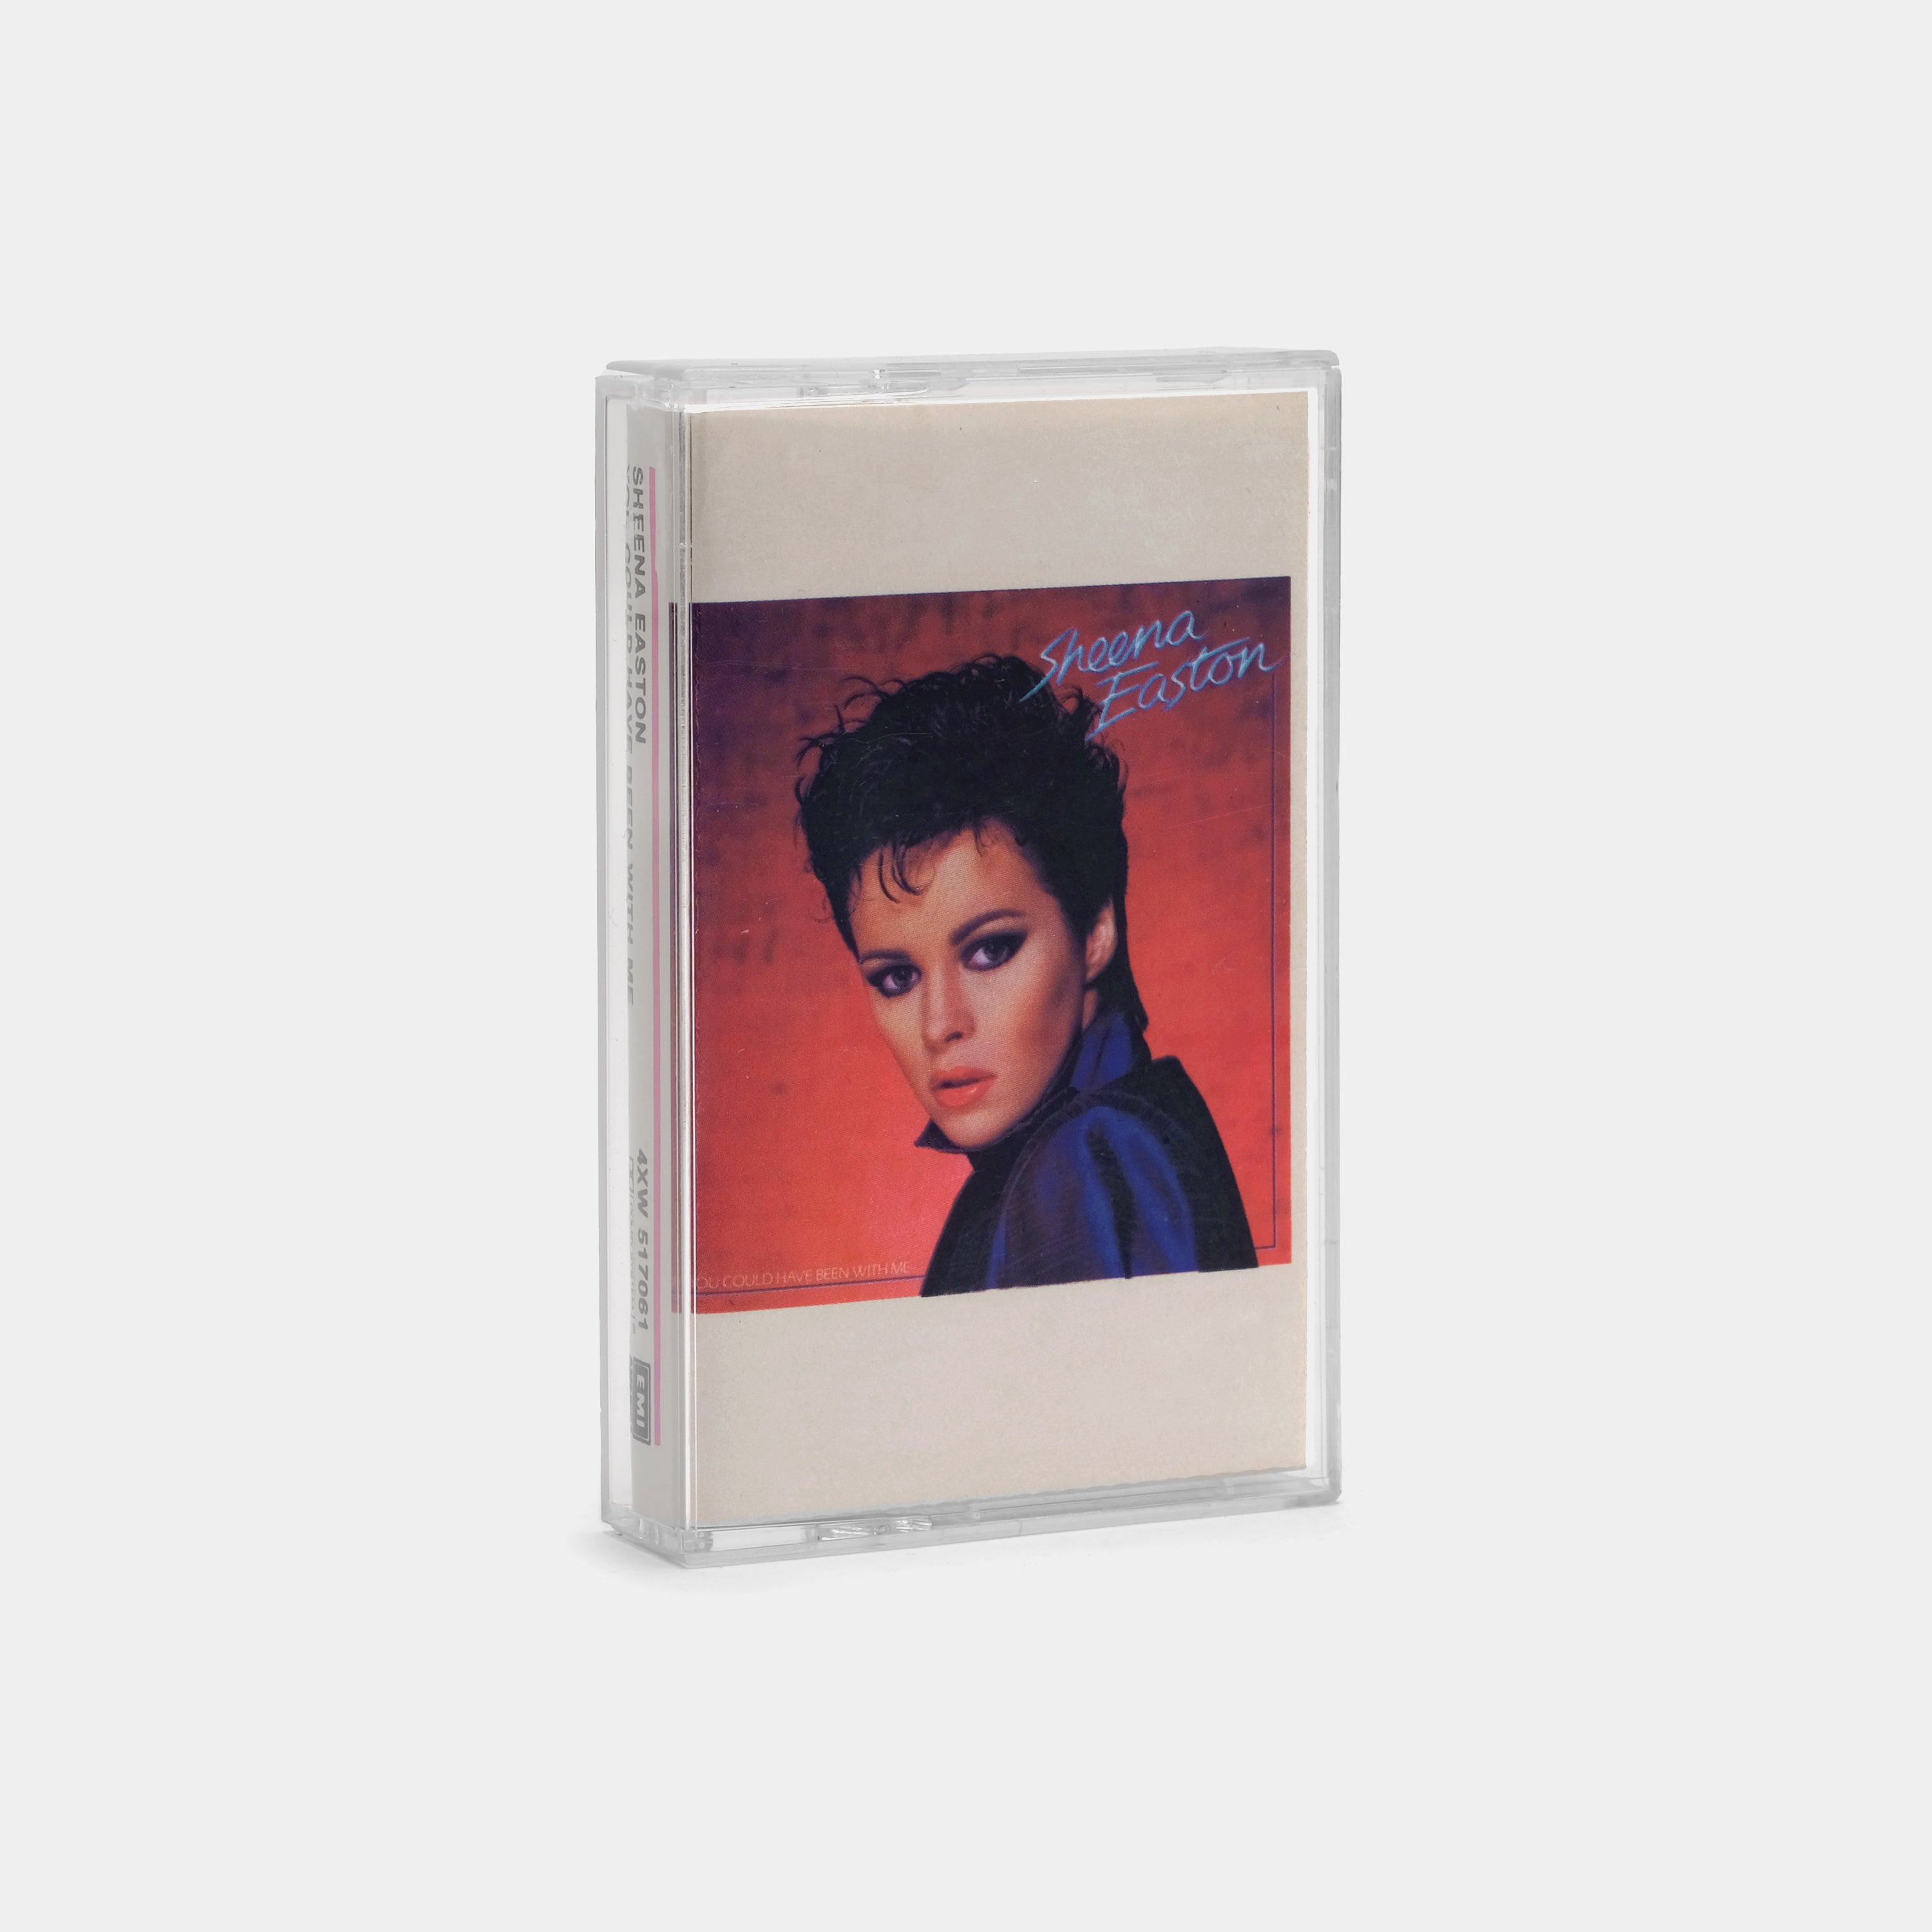 Sheena Easton - You Could Have Been With Me Cassette Tape